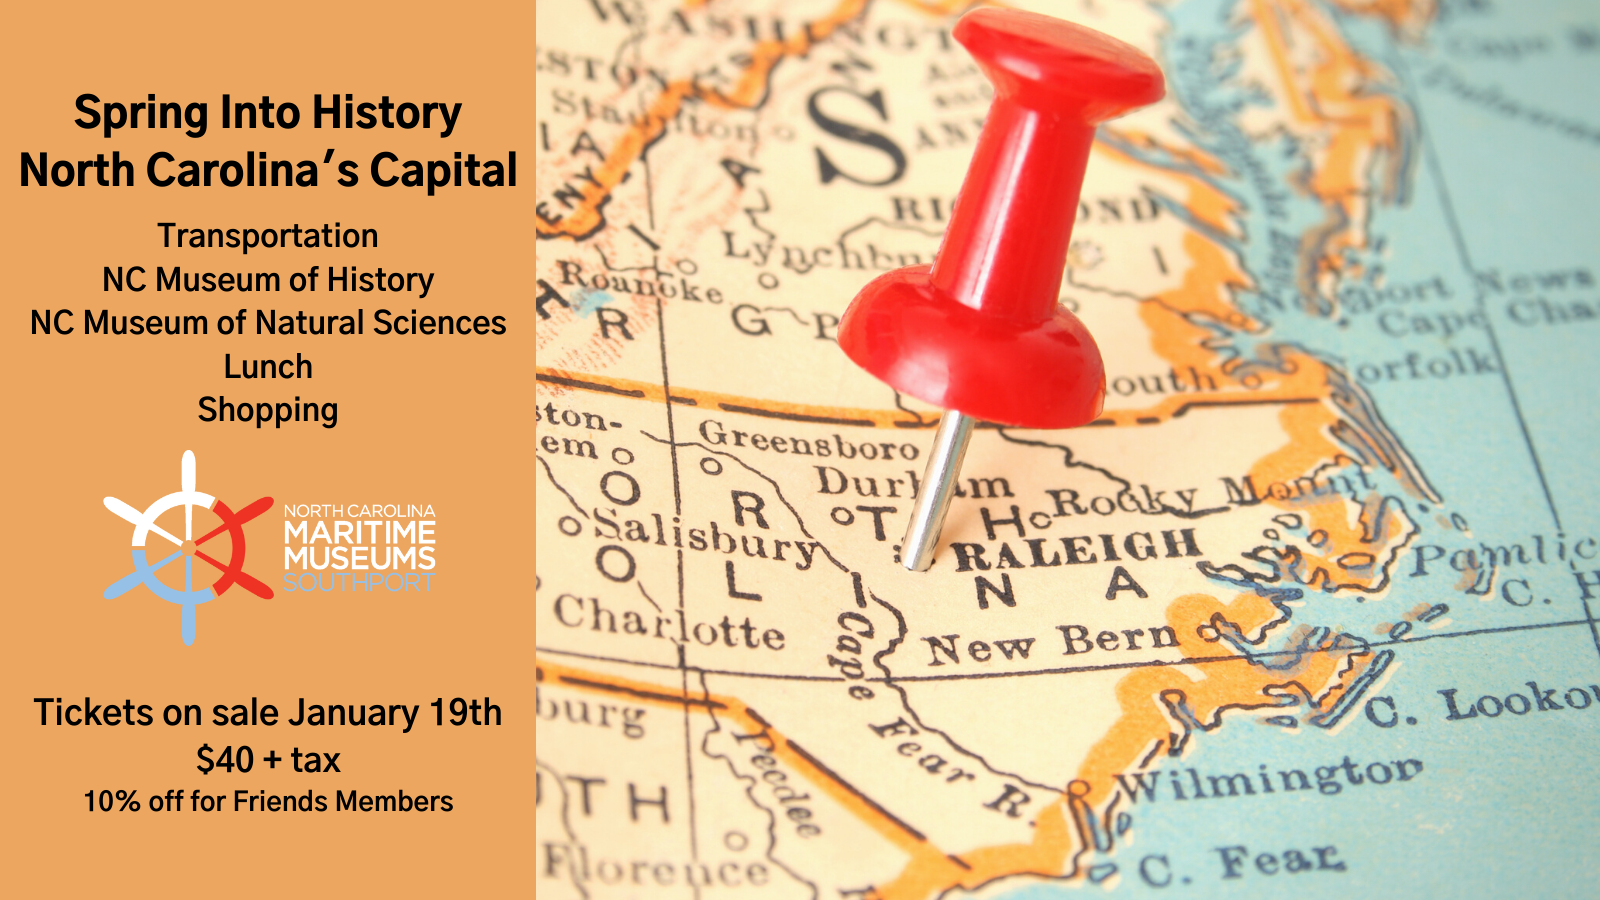 burnt orange column on left with black font reading "Spring into history North Carolina's Capital" with event details listed below. Bcakground image of map of North Carolina with red pin in Raleigh